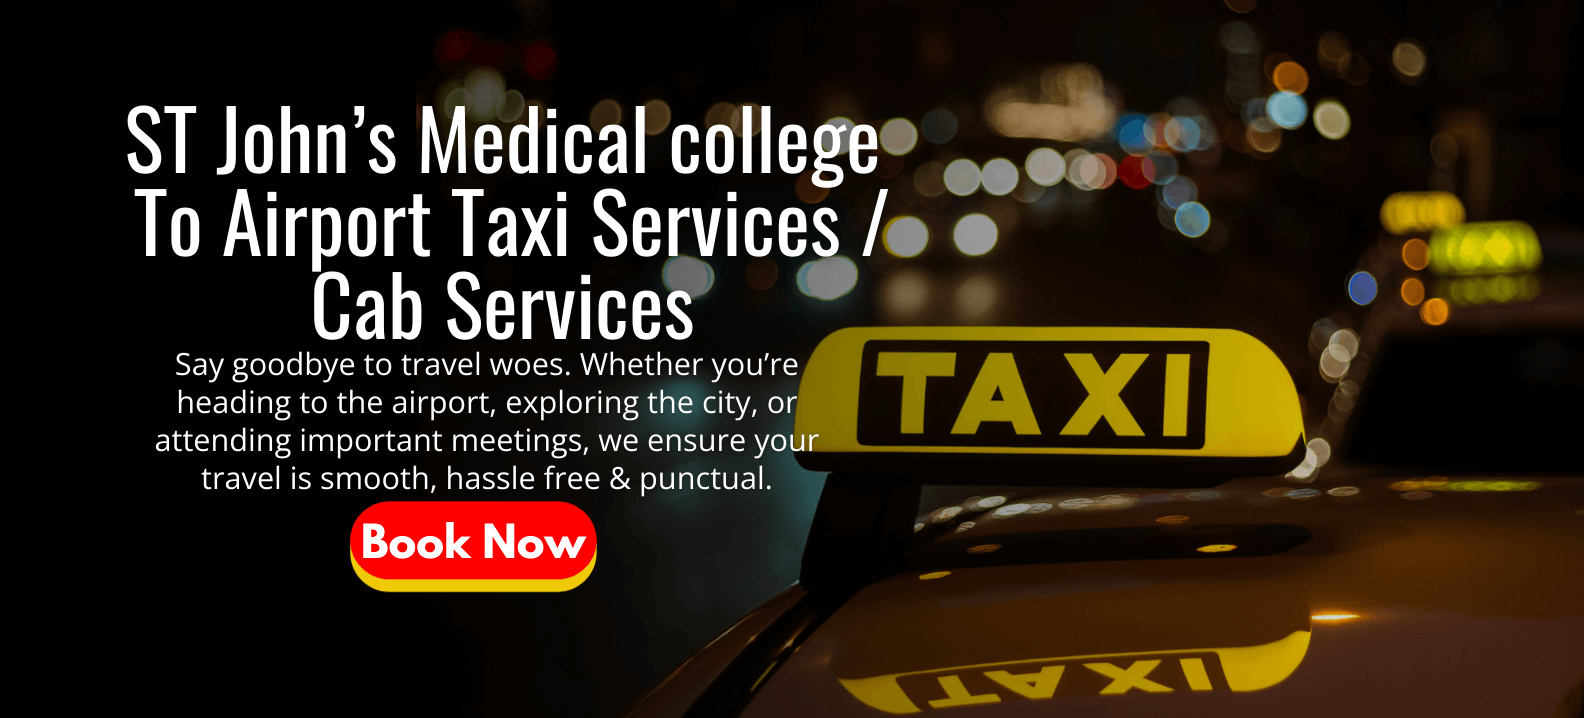 St. John’s Medical College to Airport Taxi Services | Cab Services